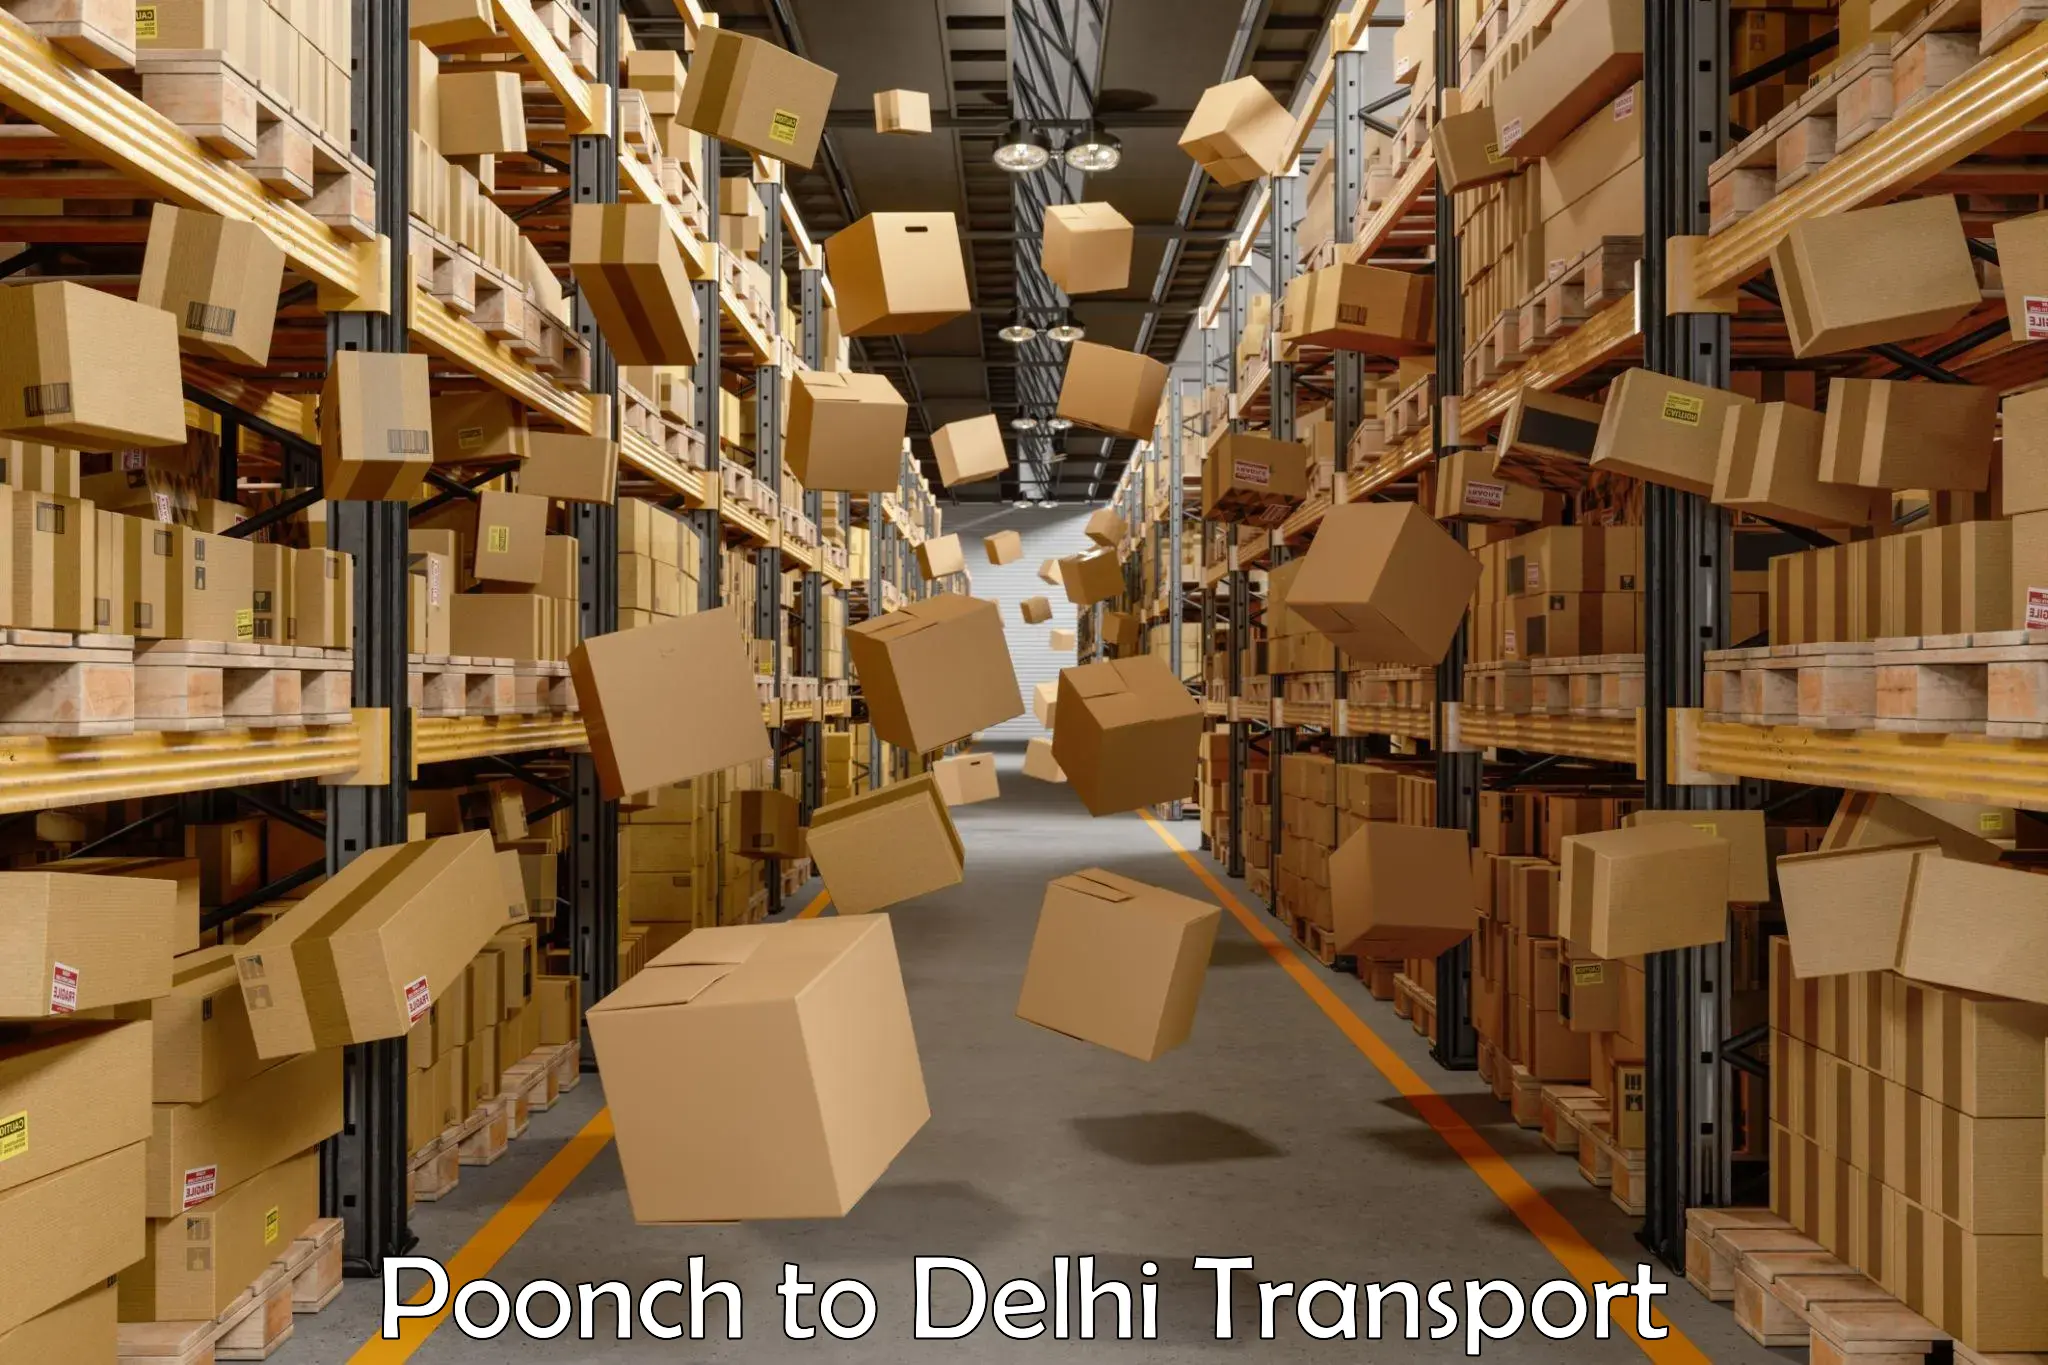 Express transport services Poonch to NCR